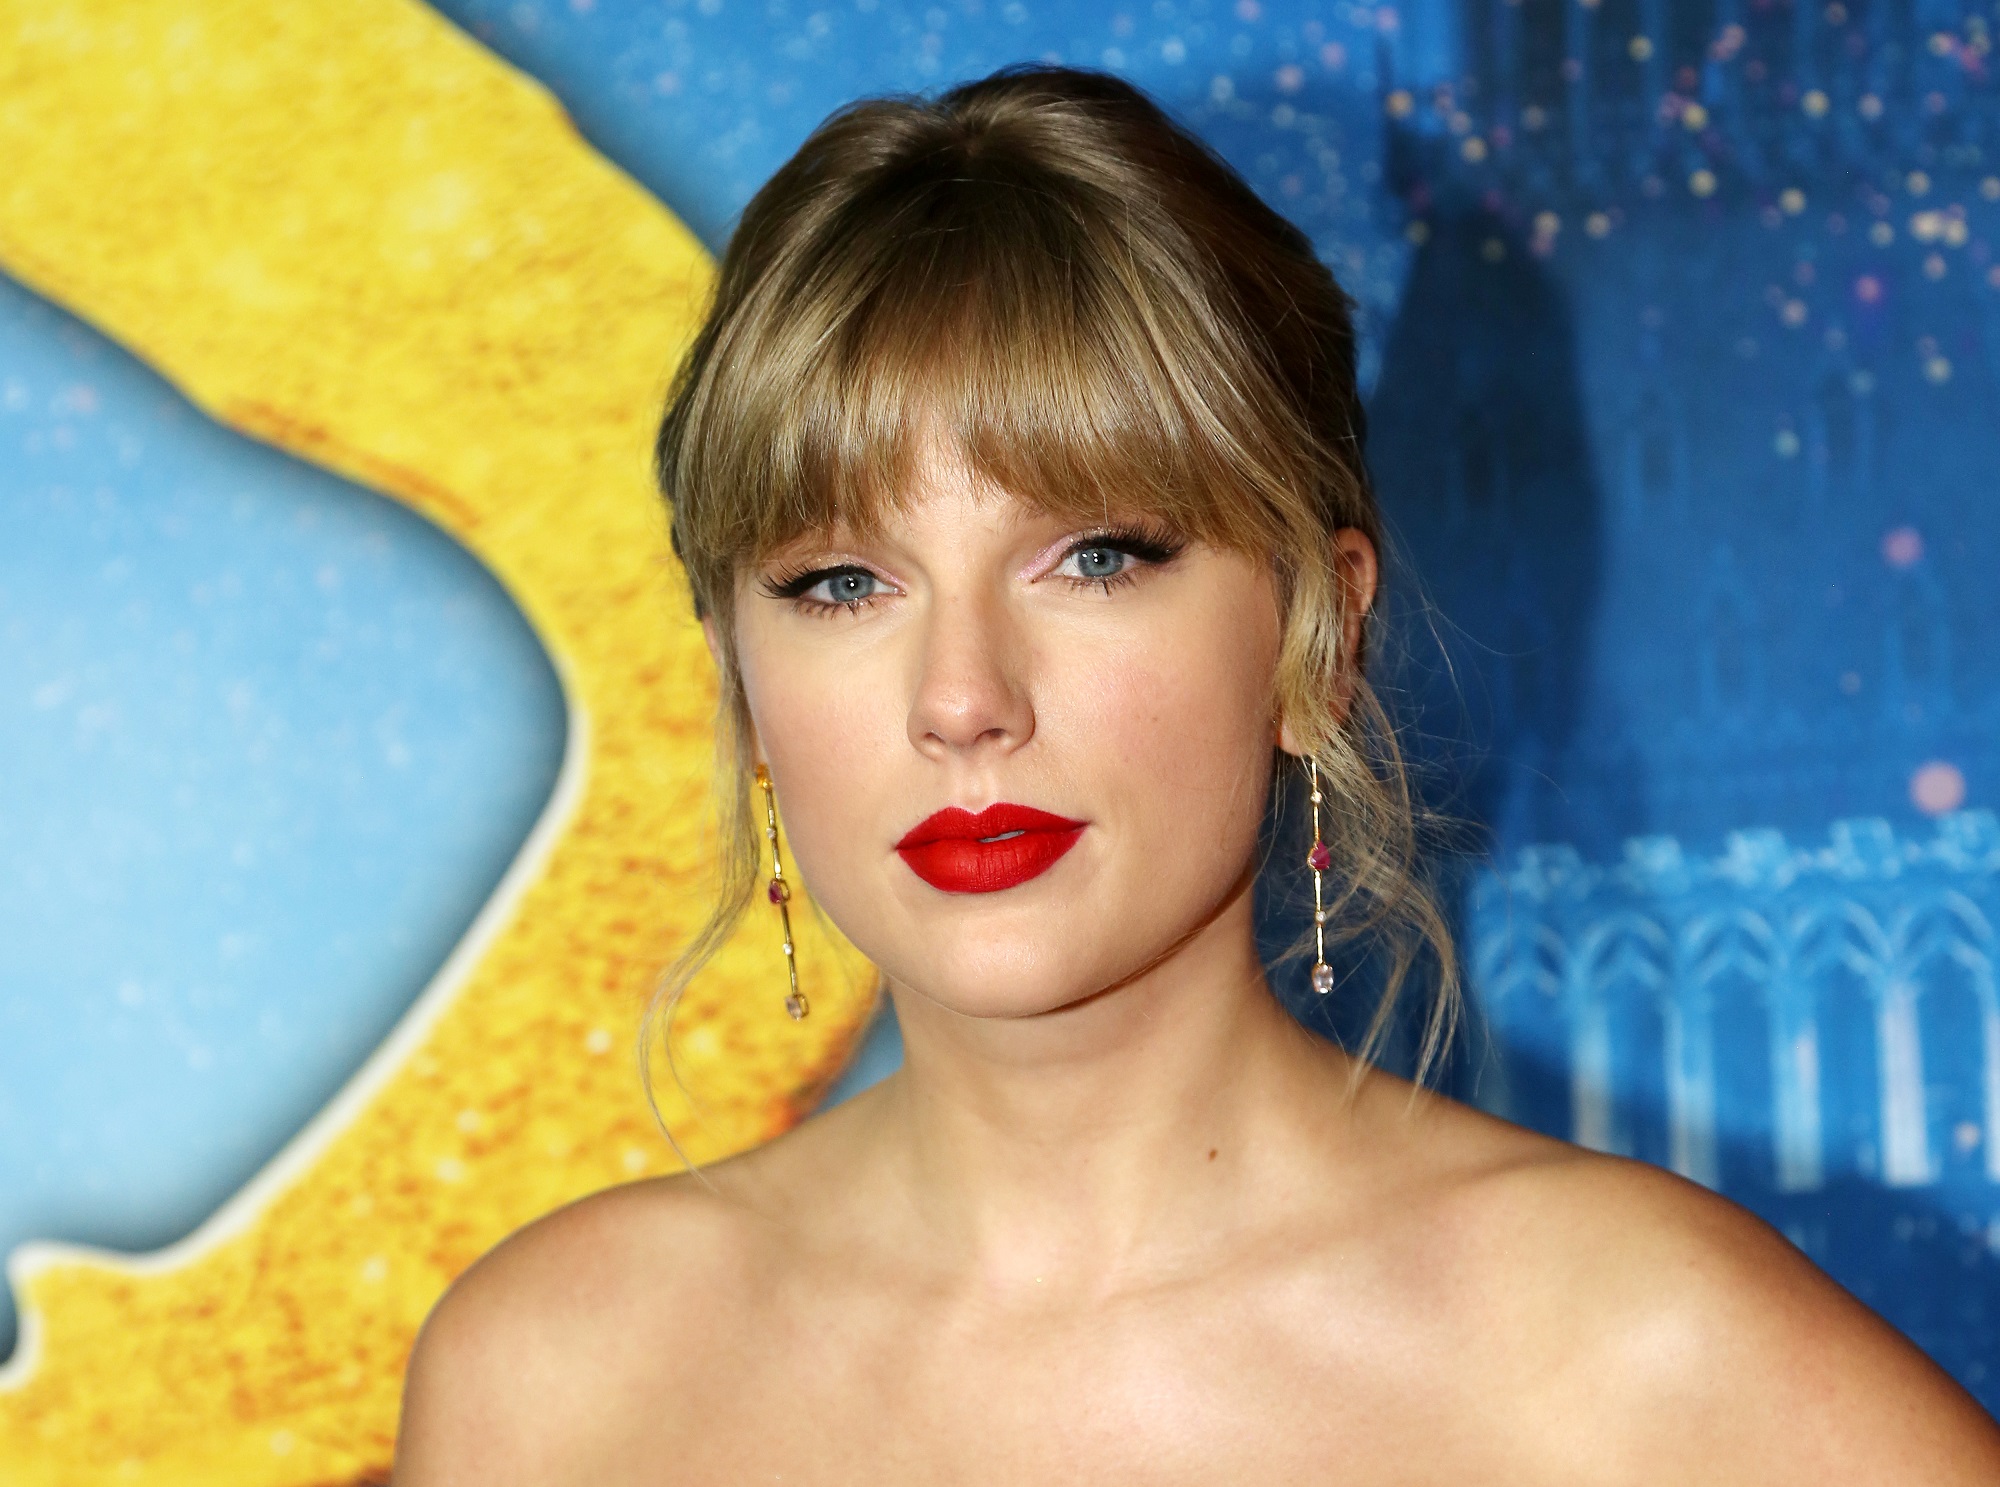 The National's Aaron Dessner collaborates with Taylor Swift on